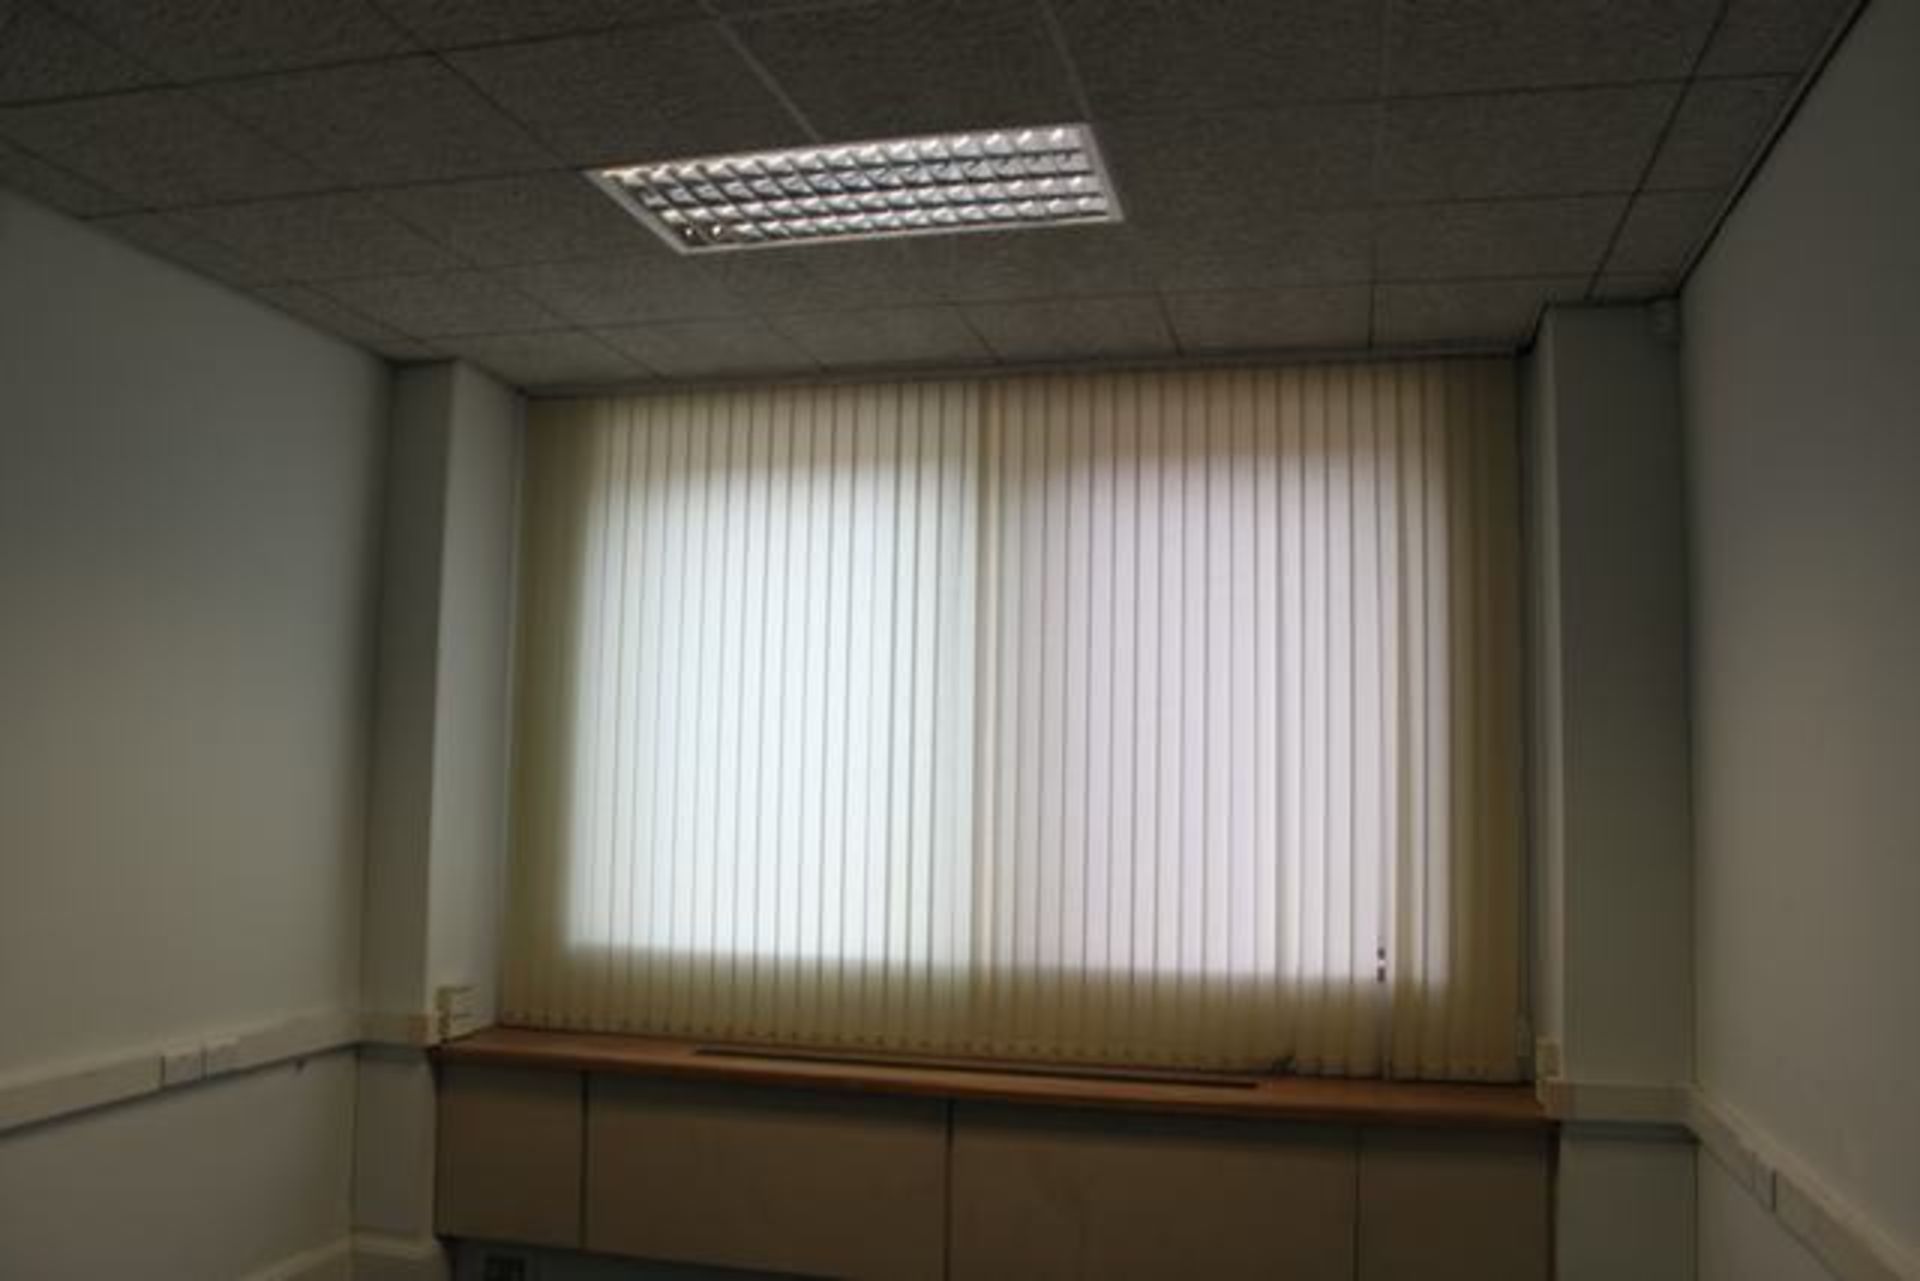 Vertical blind cream 3500mm x 2200mm complete with robust aluminium head rail with beaded tilt chain